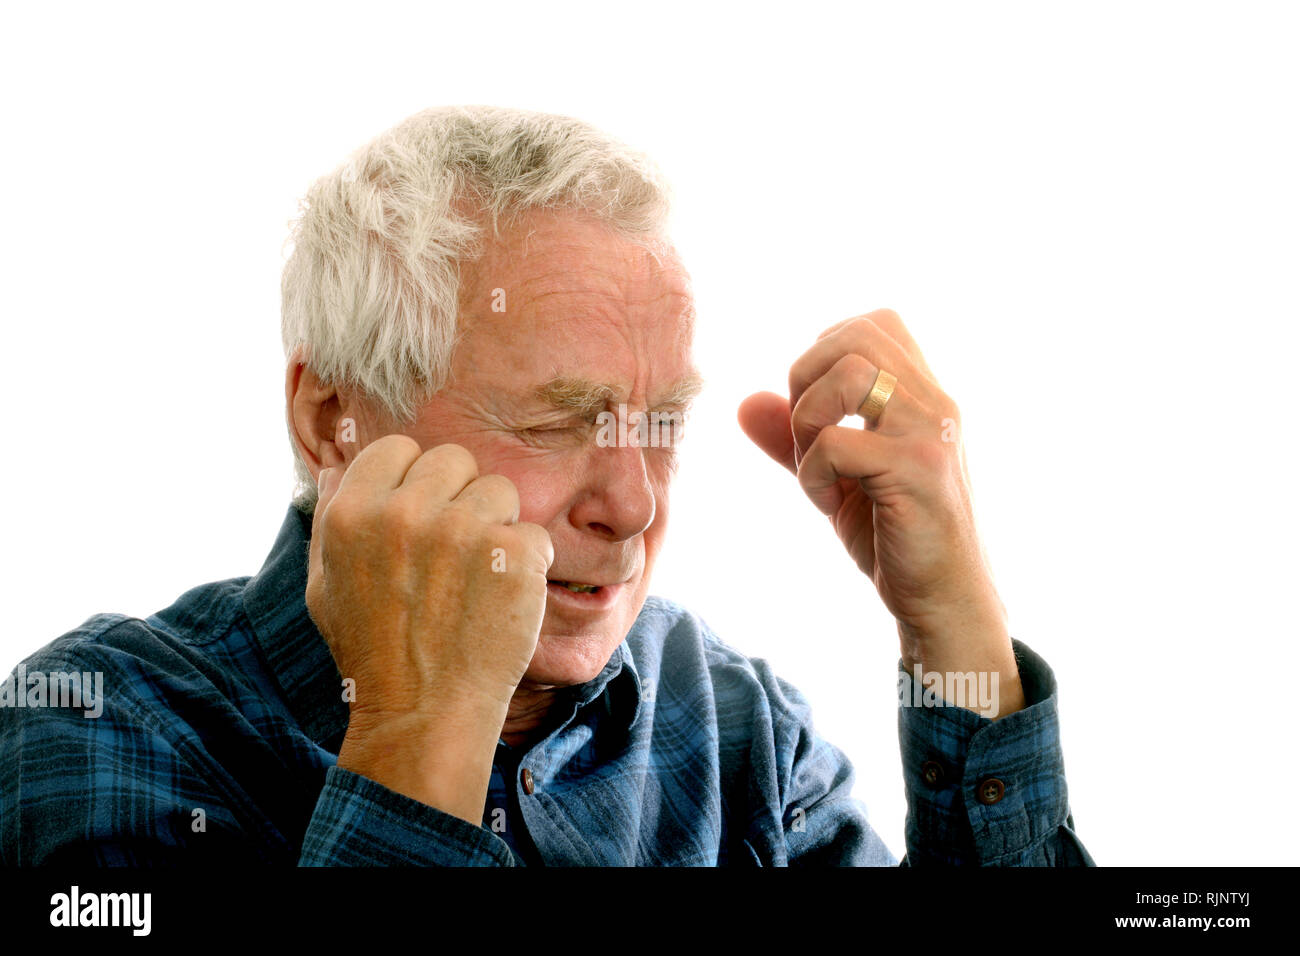 A man in his 60's showing anger or frustration Stock Photo